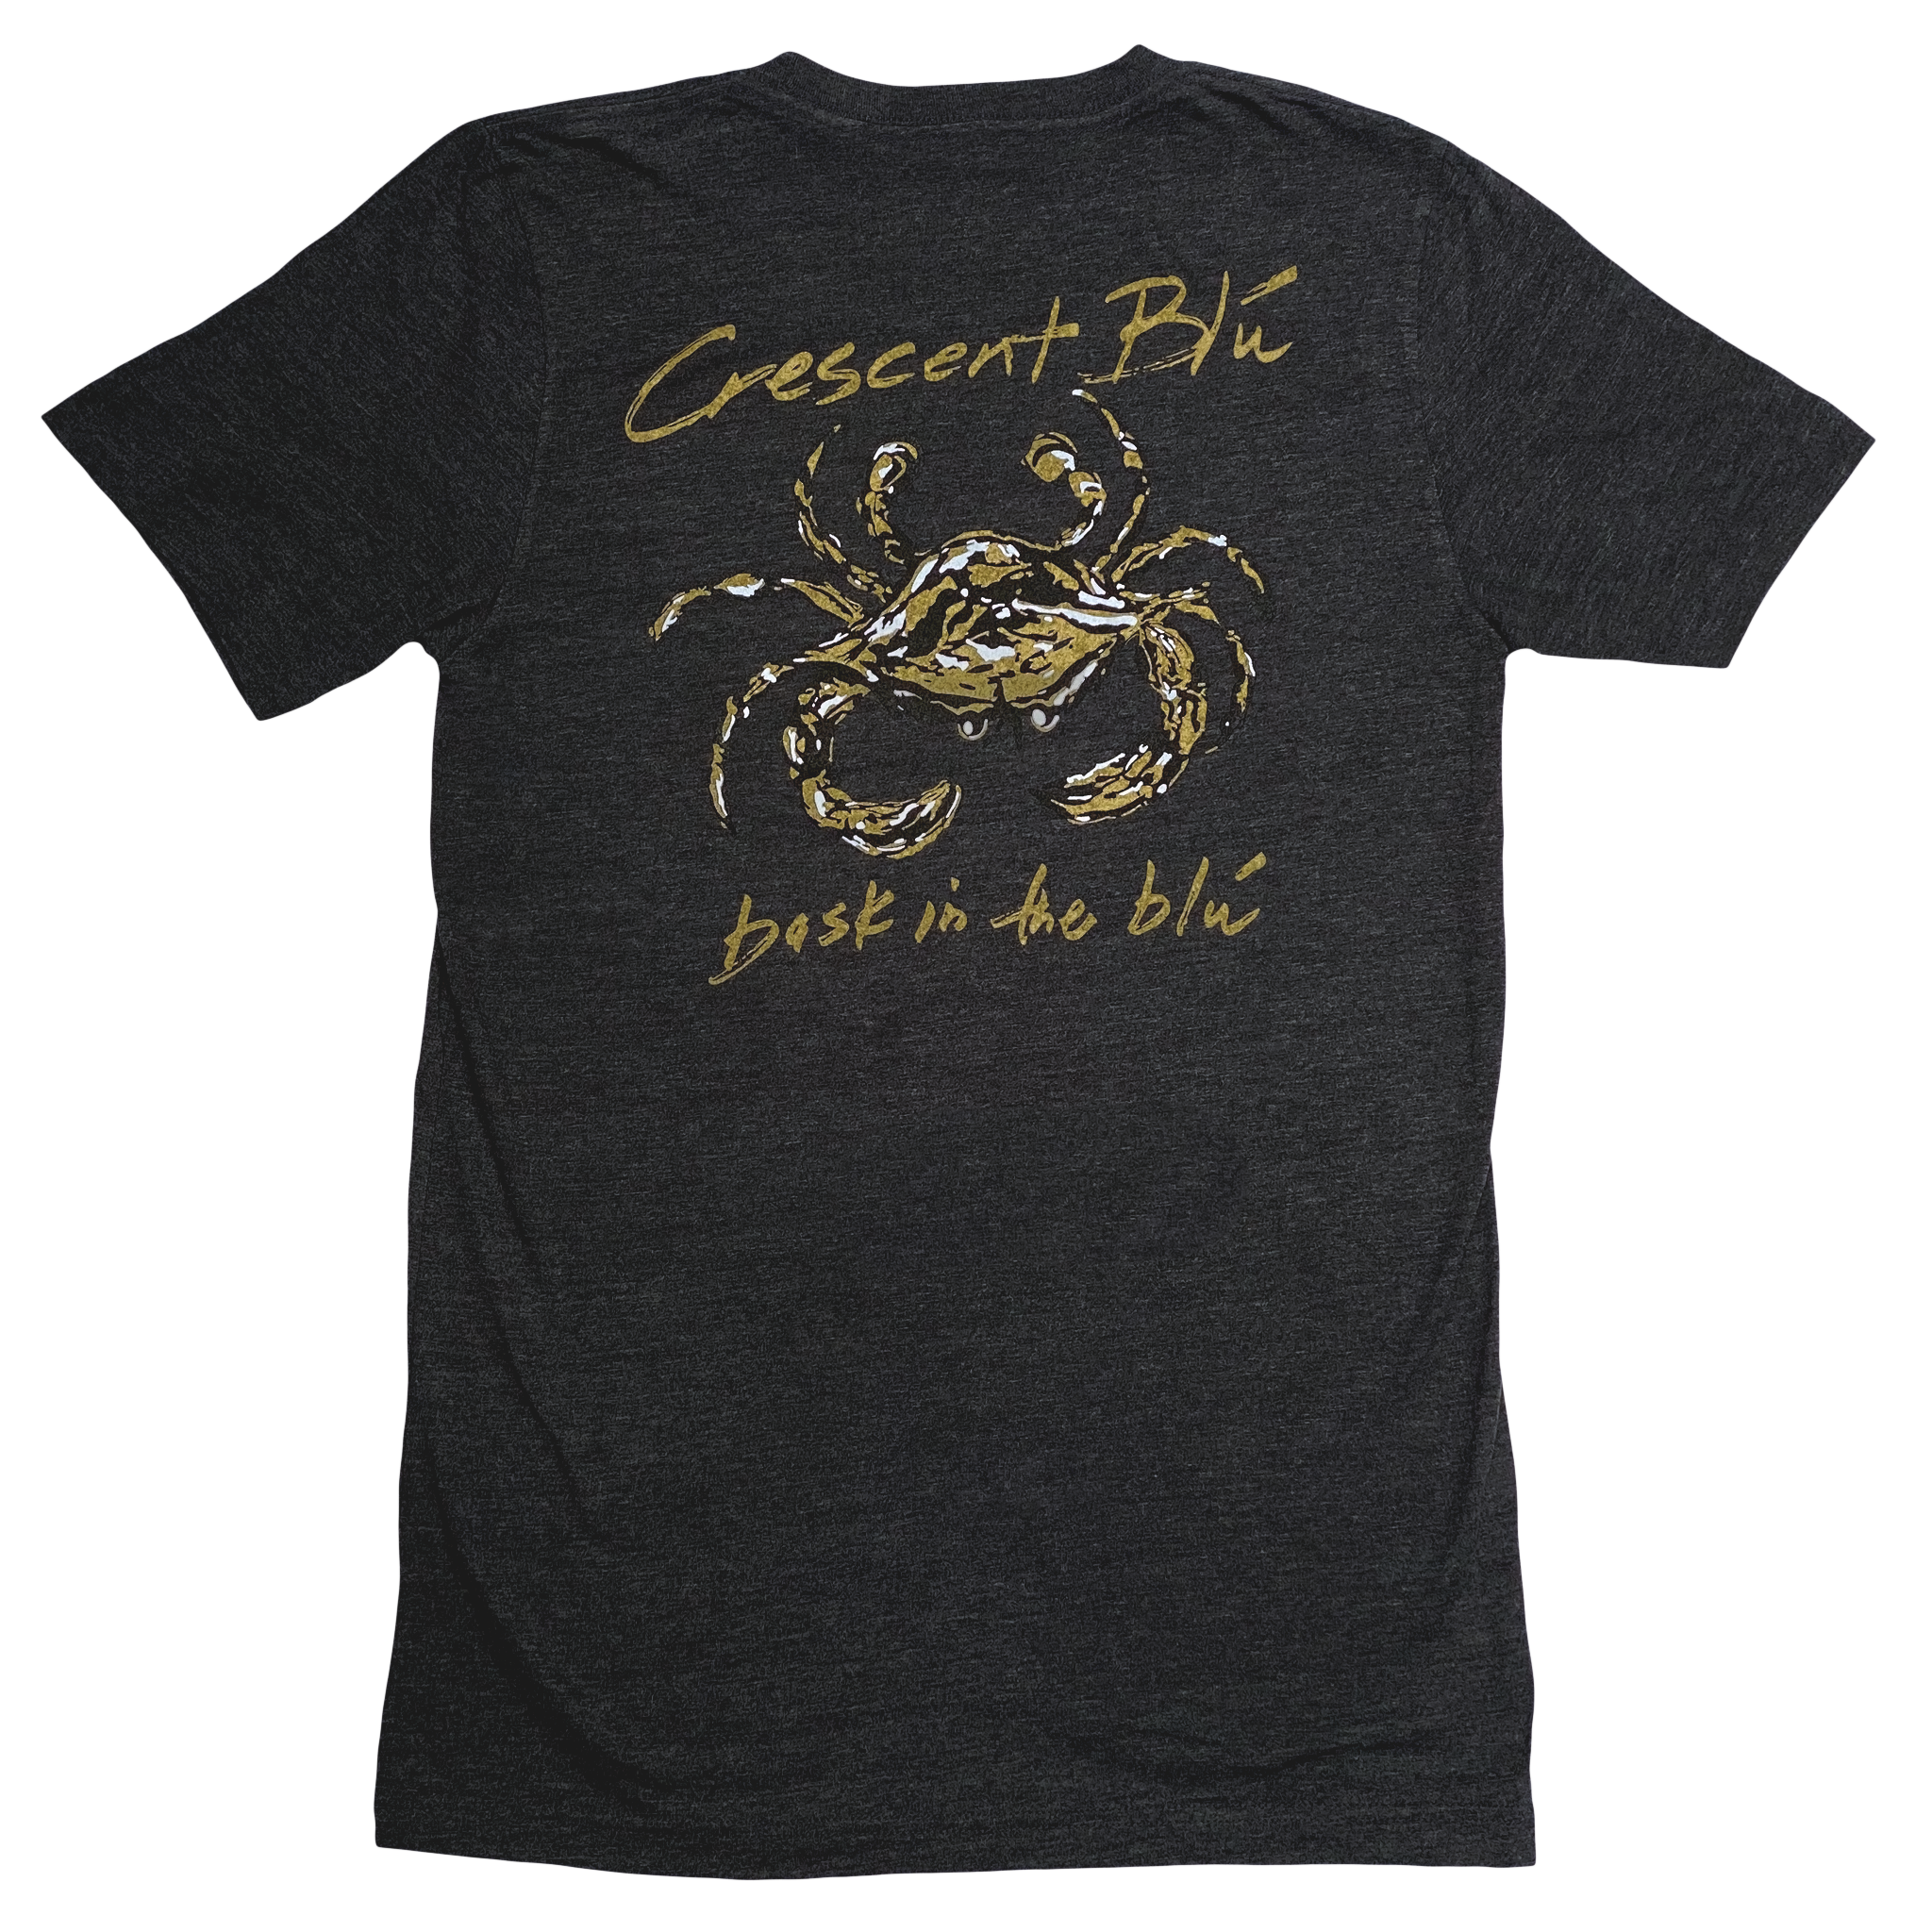 A black, gold, and white crab centered on the back of a short sleeve dark heather gray t-shirt. In gold above the crab is Crescent Blu, below the crab in gold is bask in the blu.